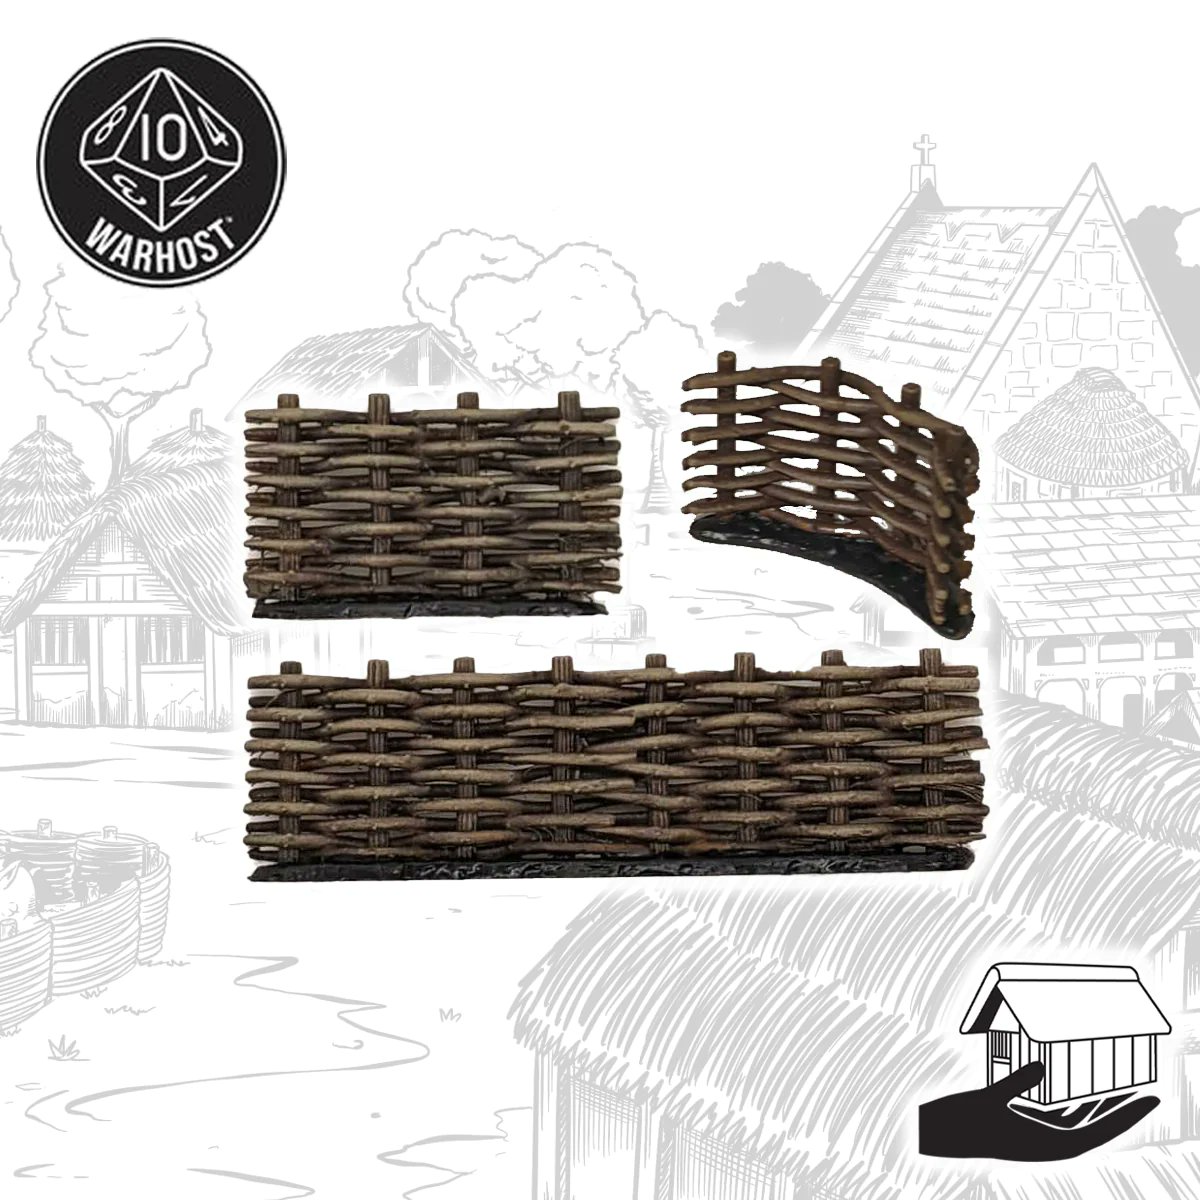 •Wattle Fences•
Remarkably sturdy for such a simple construction
rebrand.ly/dxb1guf
#BaronsWar #Medieval #13thCentury #Outremer #footsore #footsoreminiatures #SPG #wargaming #warmongers #gaming #minwargaming #tabletopgames #miniatures #figures